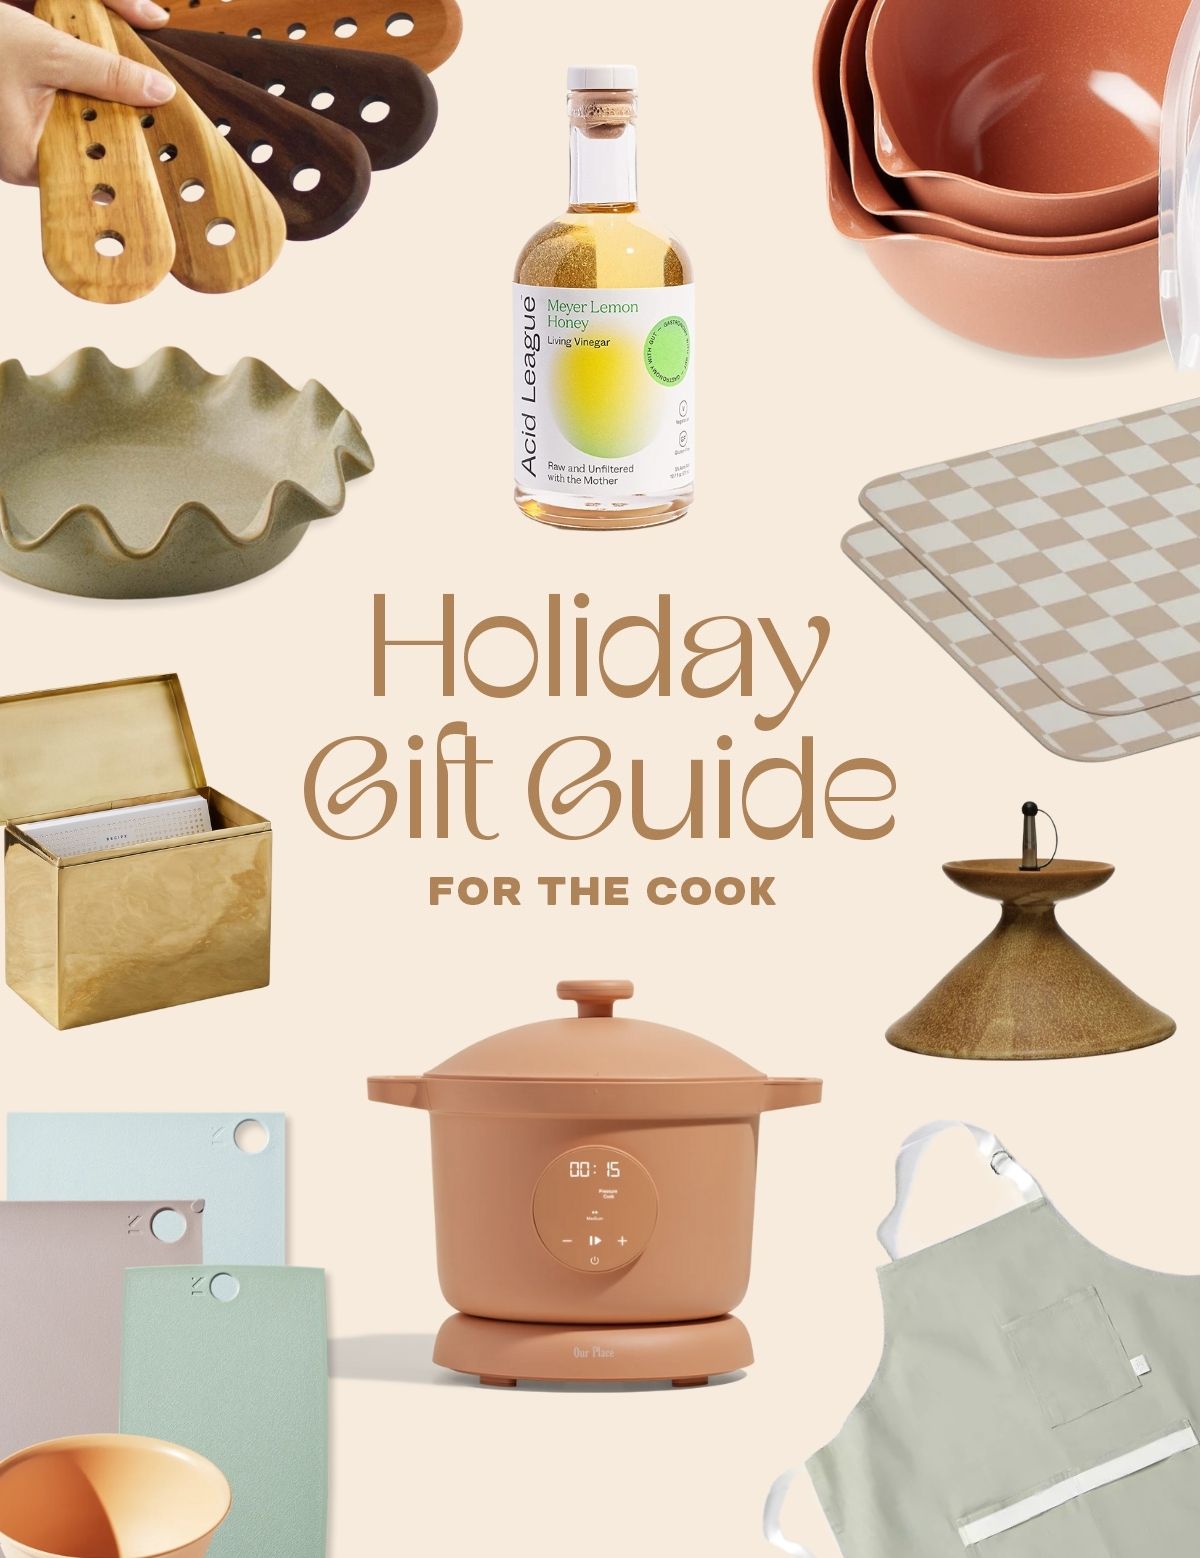 https://almostmakesperfect.com/wp-content/uploads/2022/11/holiday-gift-guide-for-the-cook-header-image-3.jpg